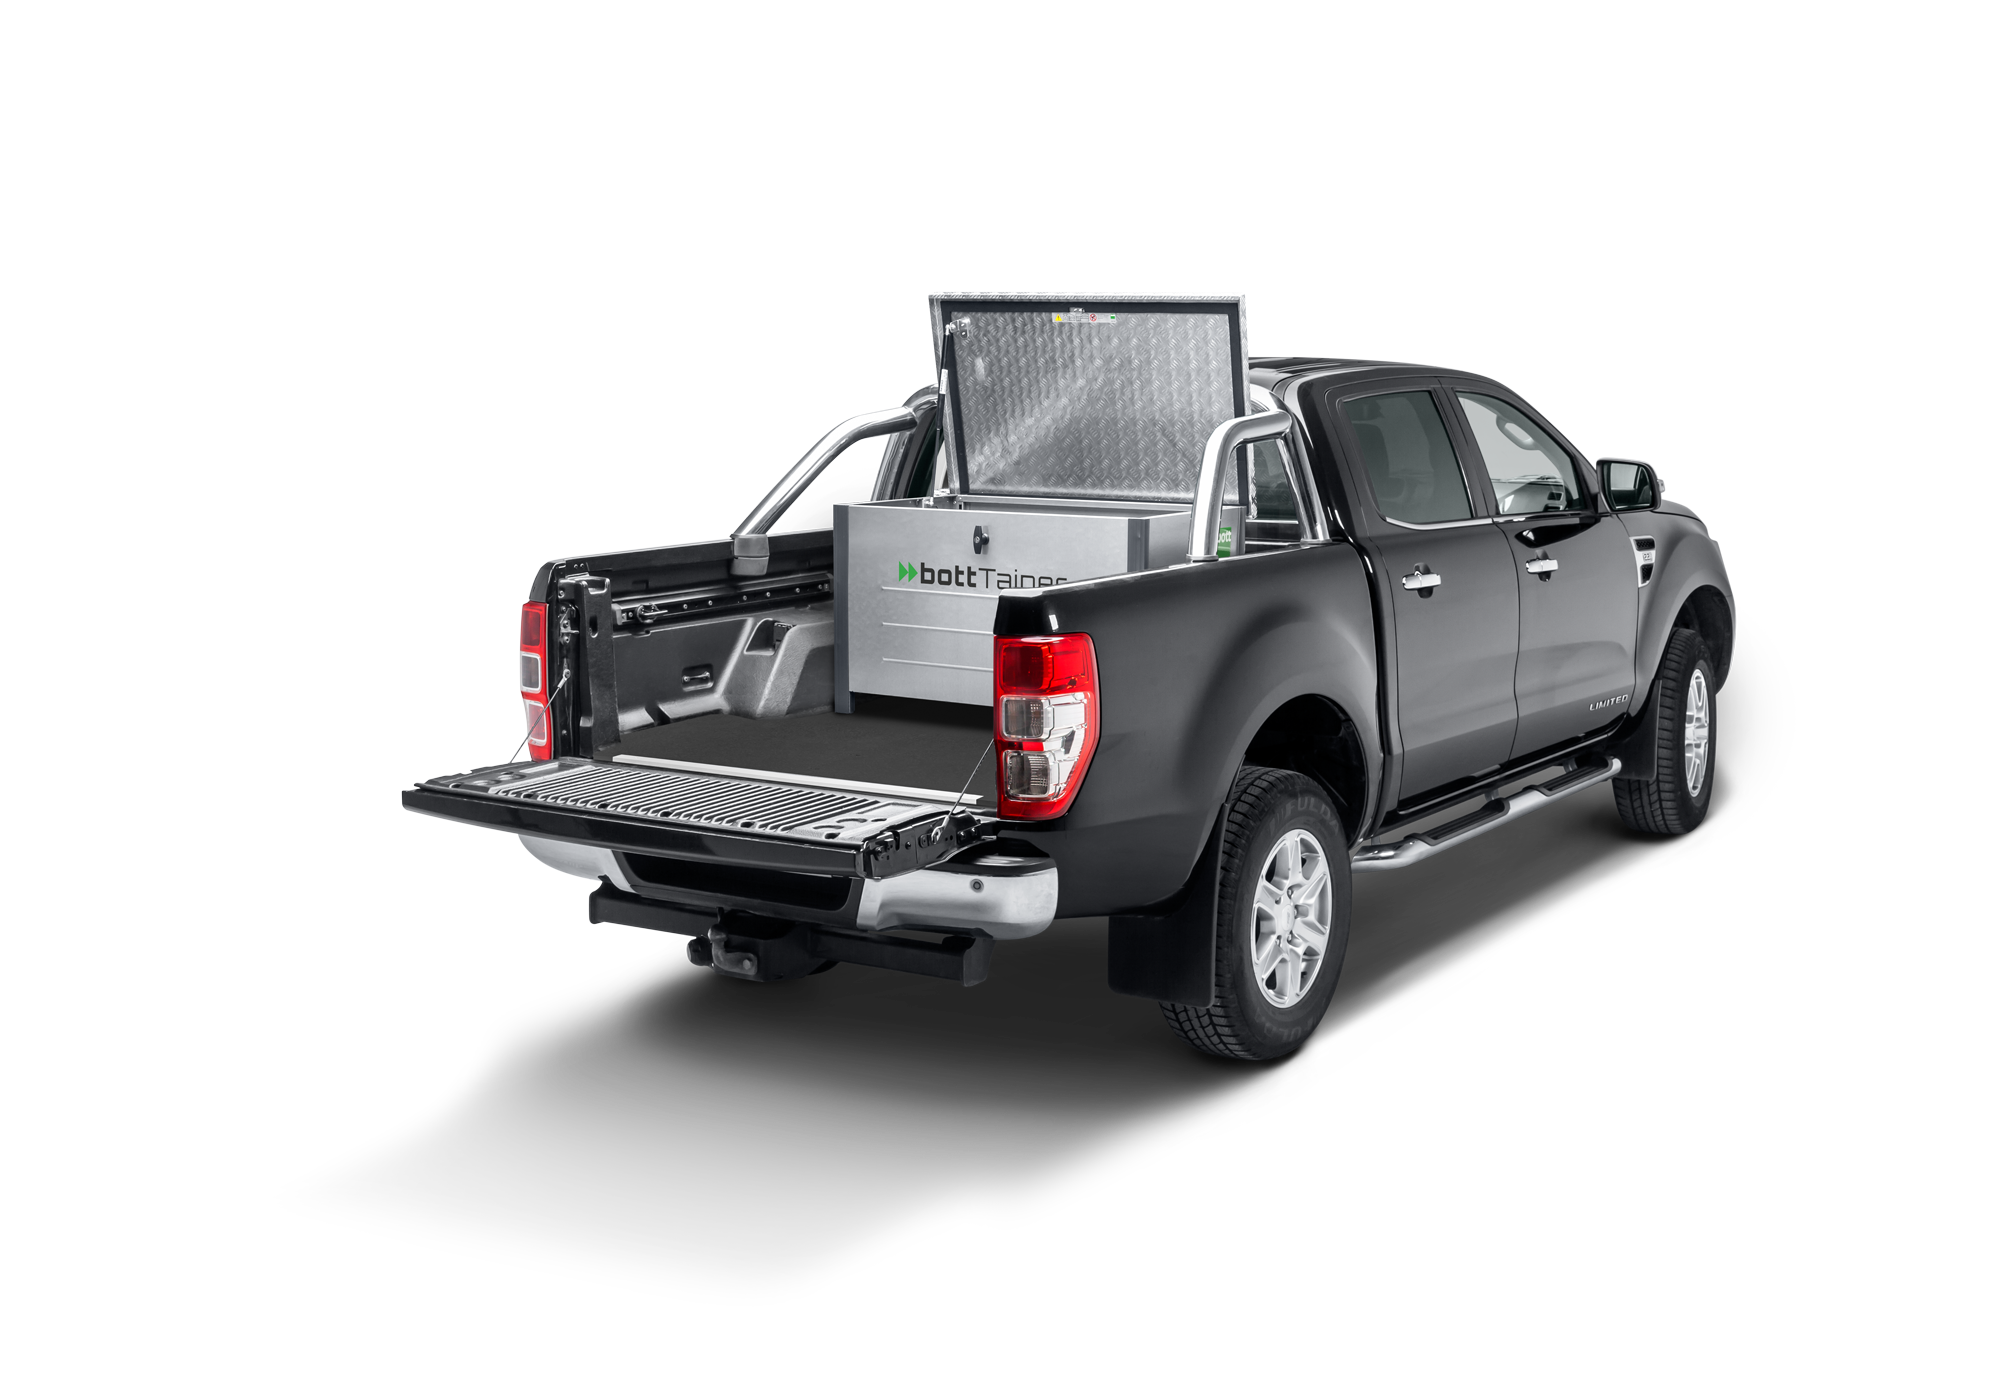 van racking for platform vehicles, example of a container for Ford Ranger